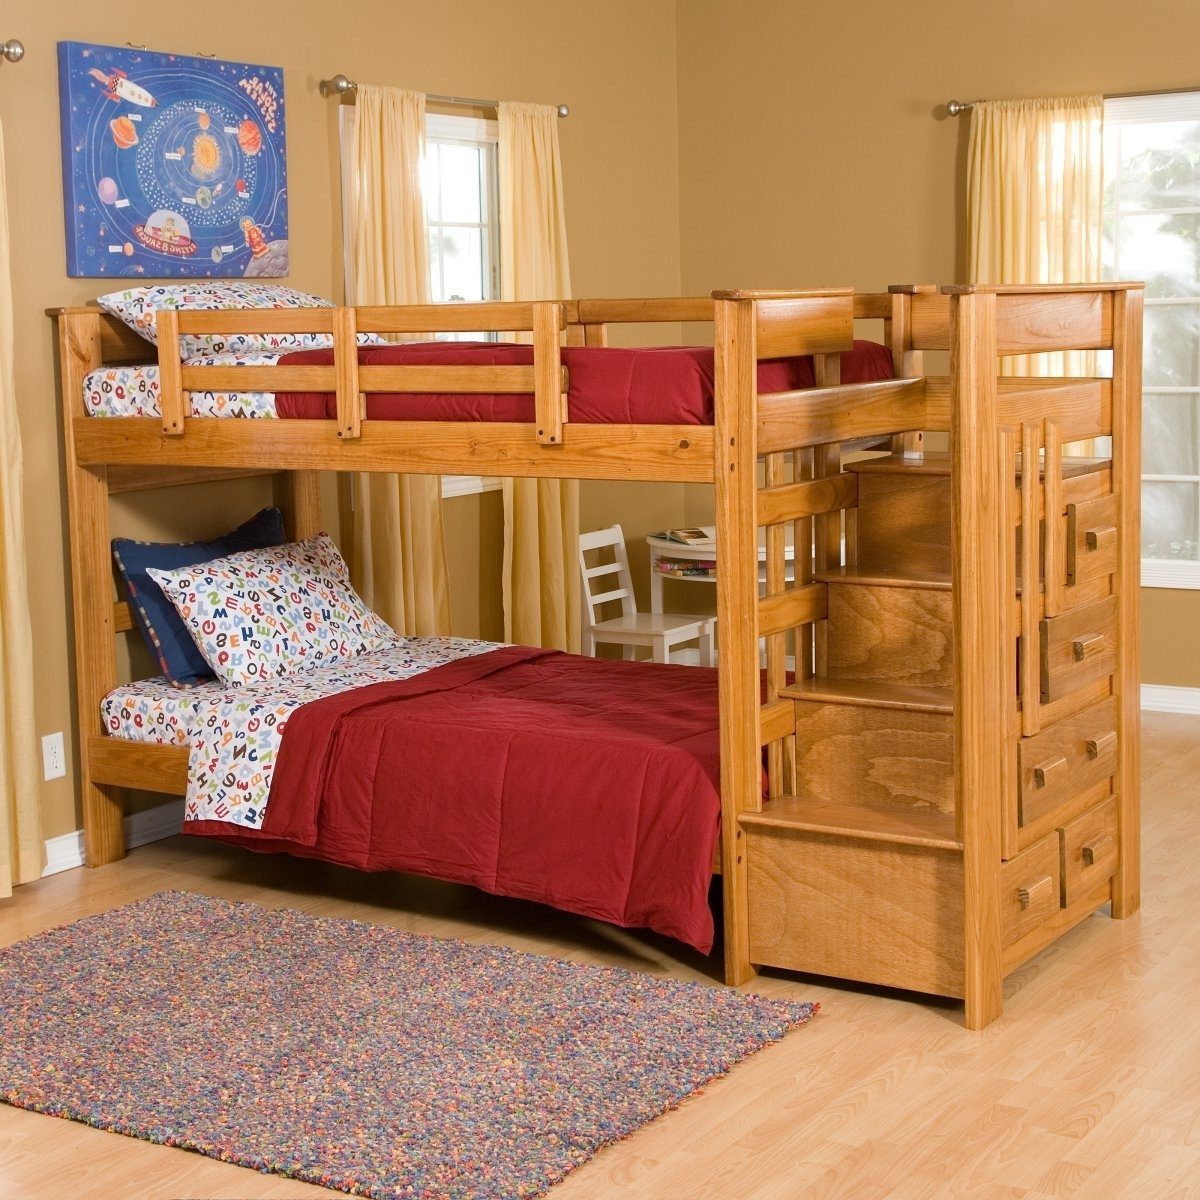 cute bunk bed rooms photo - 6